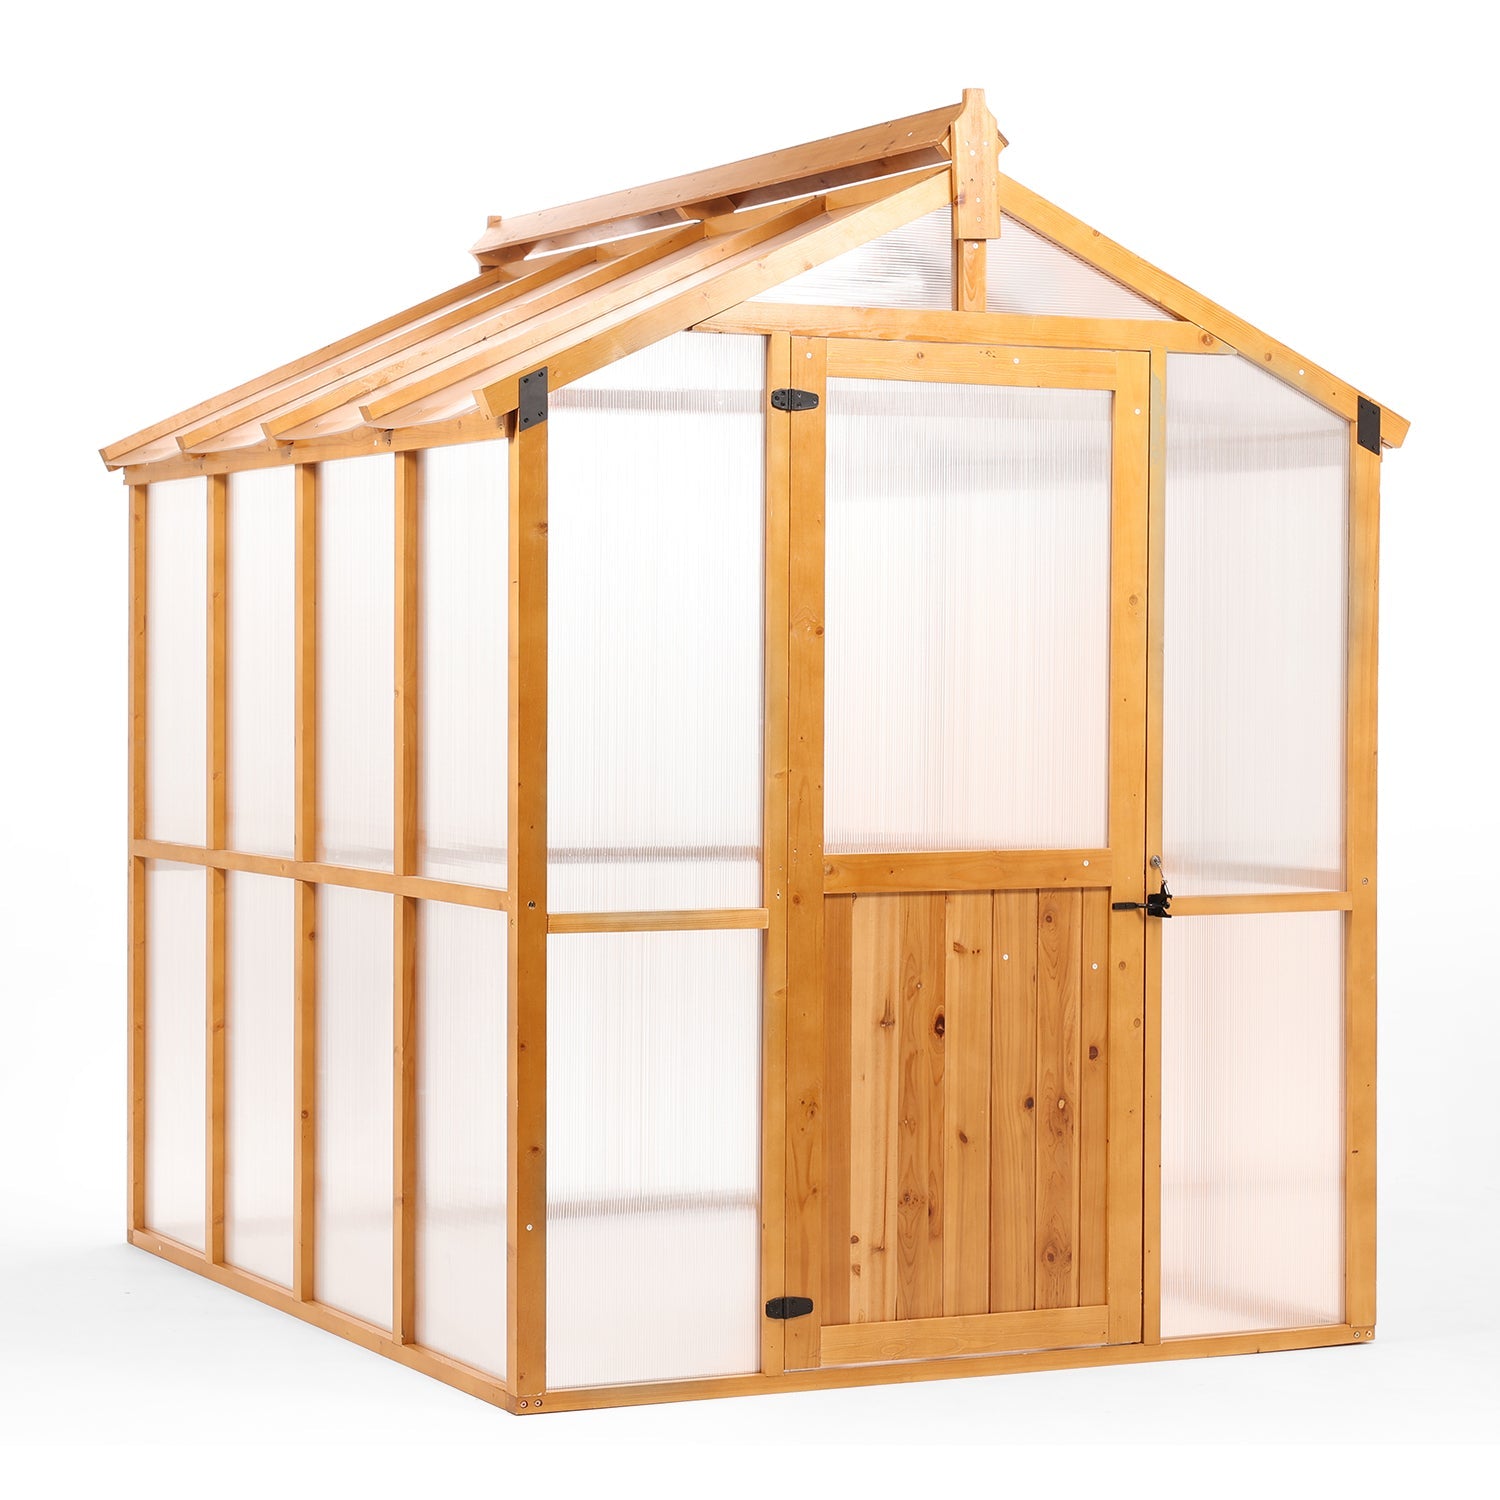 81'' x 93'' x 98'' Walk-in Polycarbonate Greenhouse with Roof Vent and Door lock, Fir Wooden Frame and Polycarbonate Panels, for Backyard Garden - Aoodor LLC